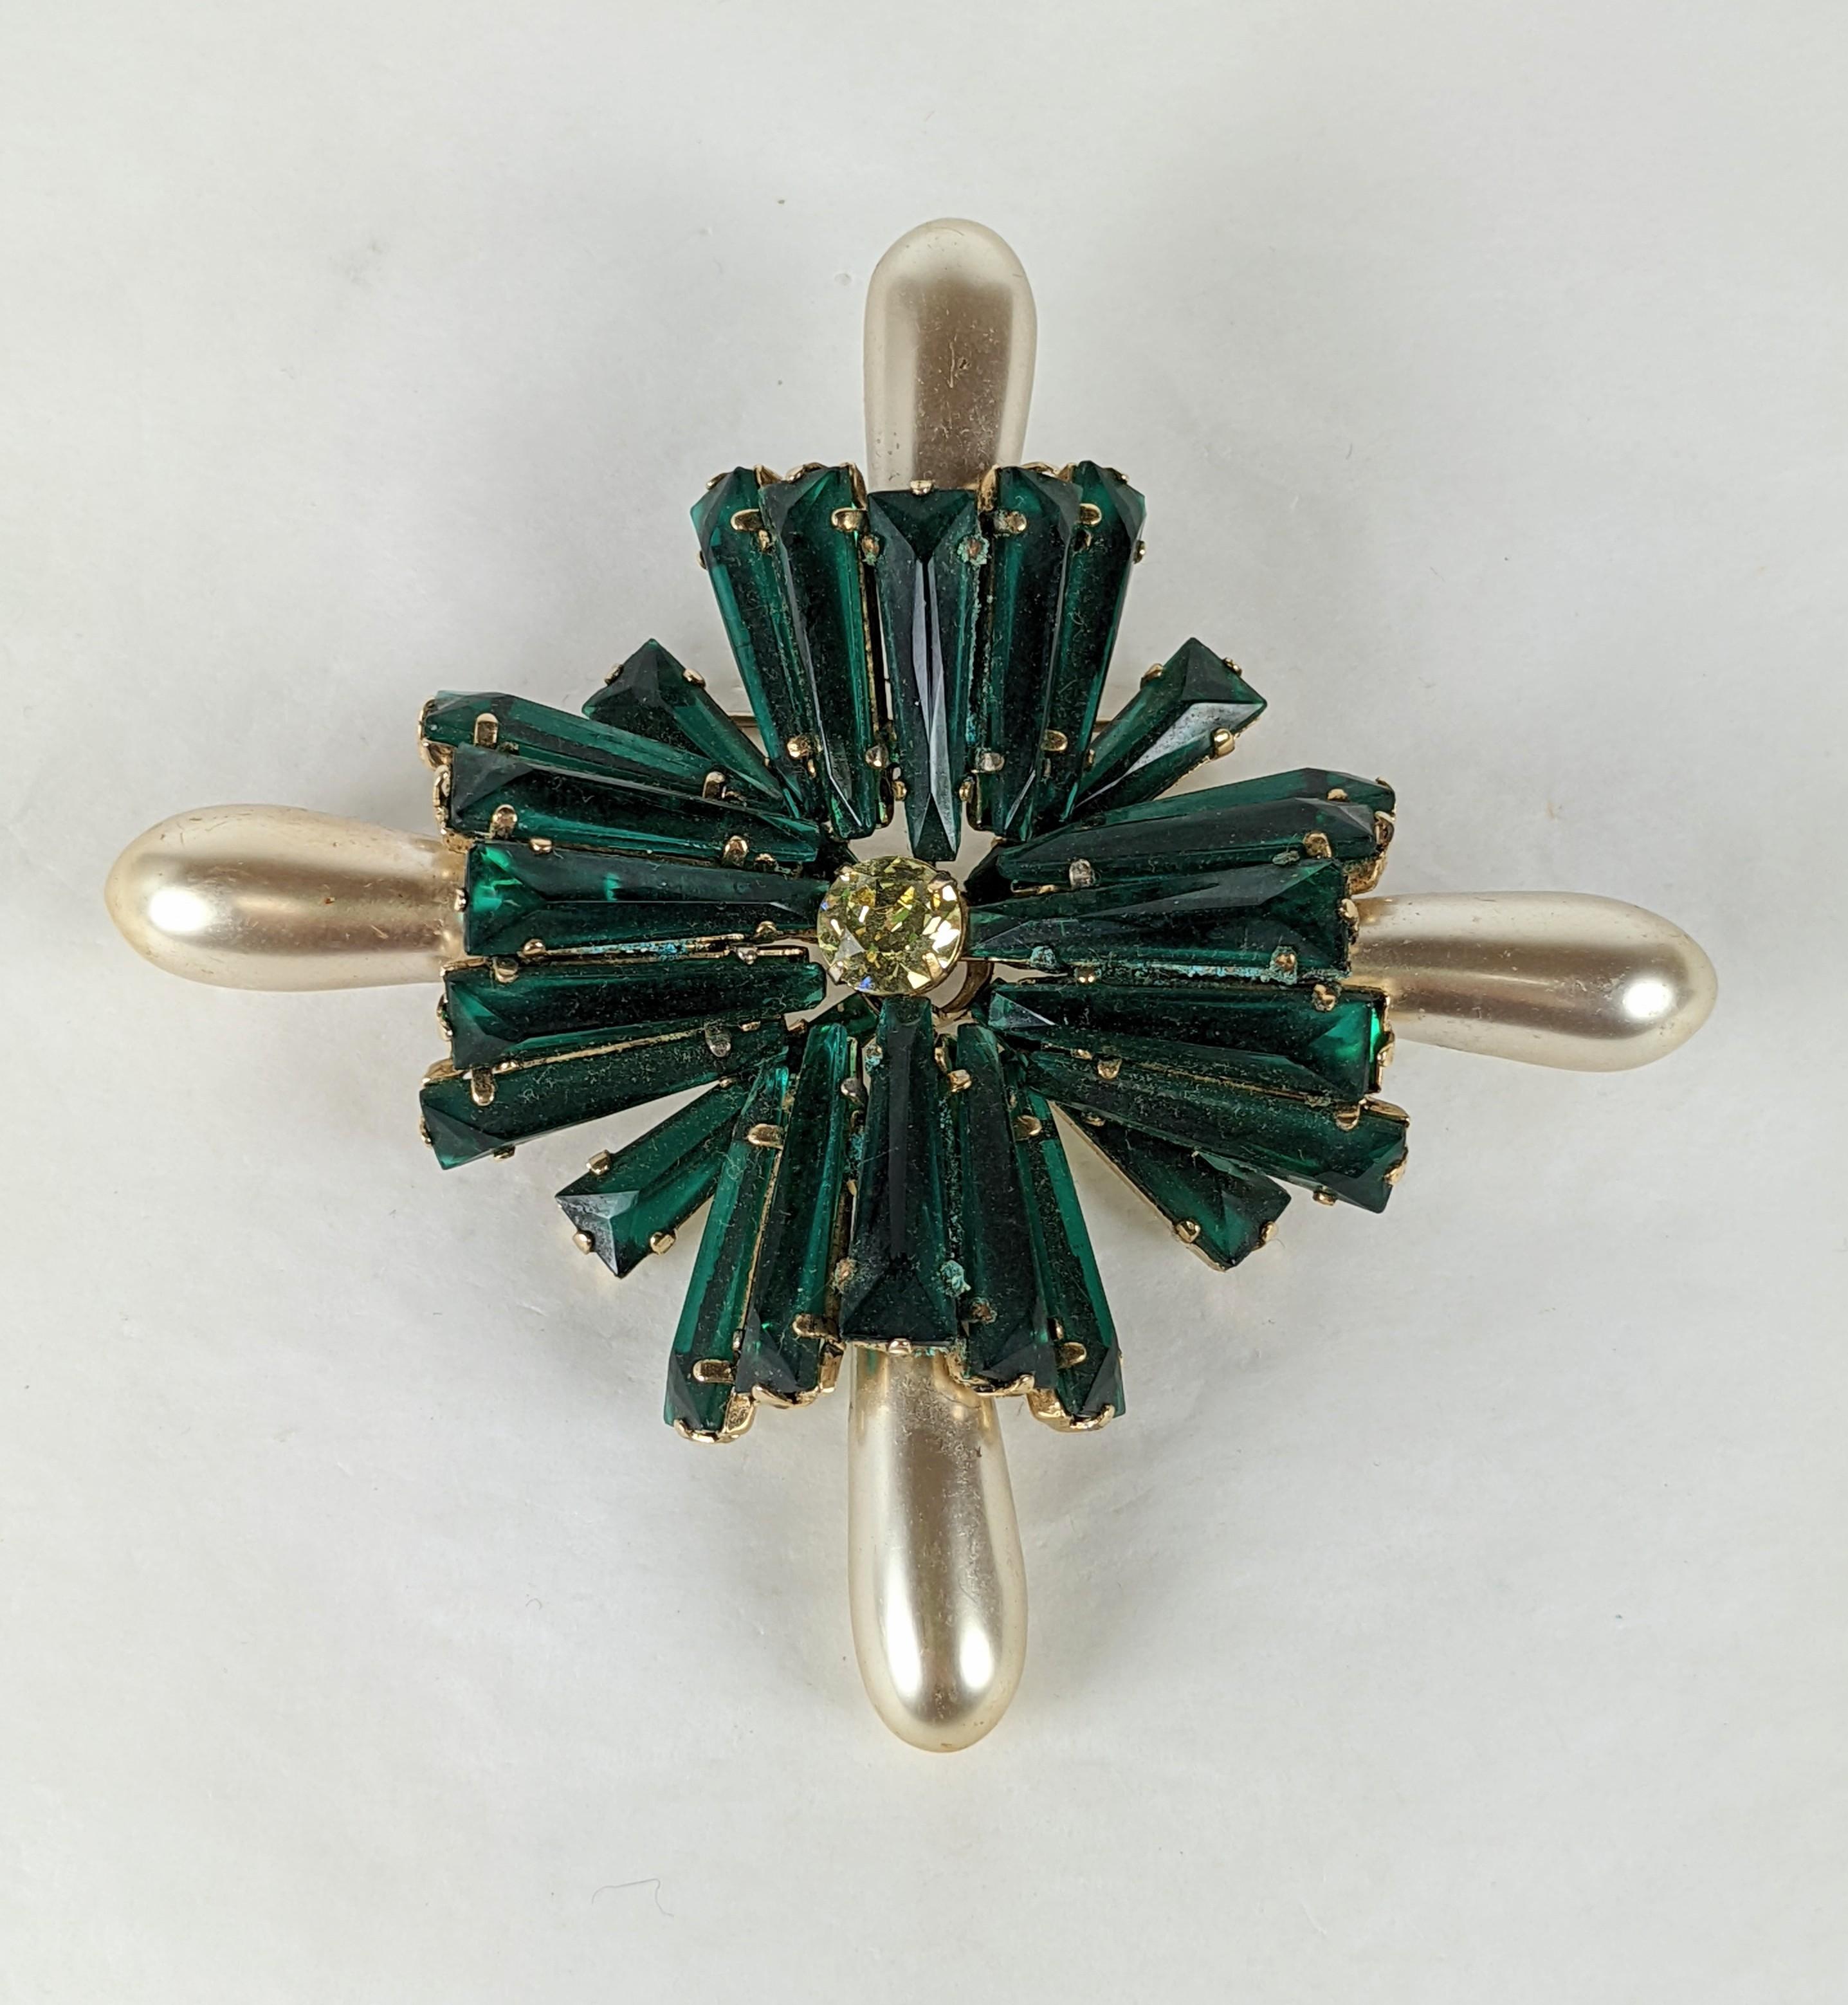 Rarest Schreiner Ruffle series Maltese cross brooch #2. Of staggered rows of signature inverted and tapered keystone emerald rectangle ruffle stones . Center brillant cut citrine and four large elongated teardrop faux pearls forming the body of the